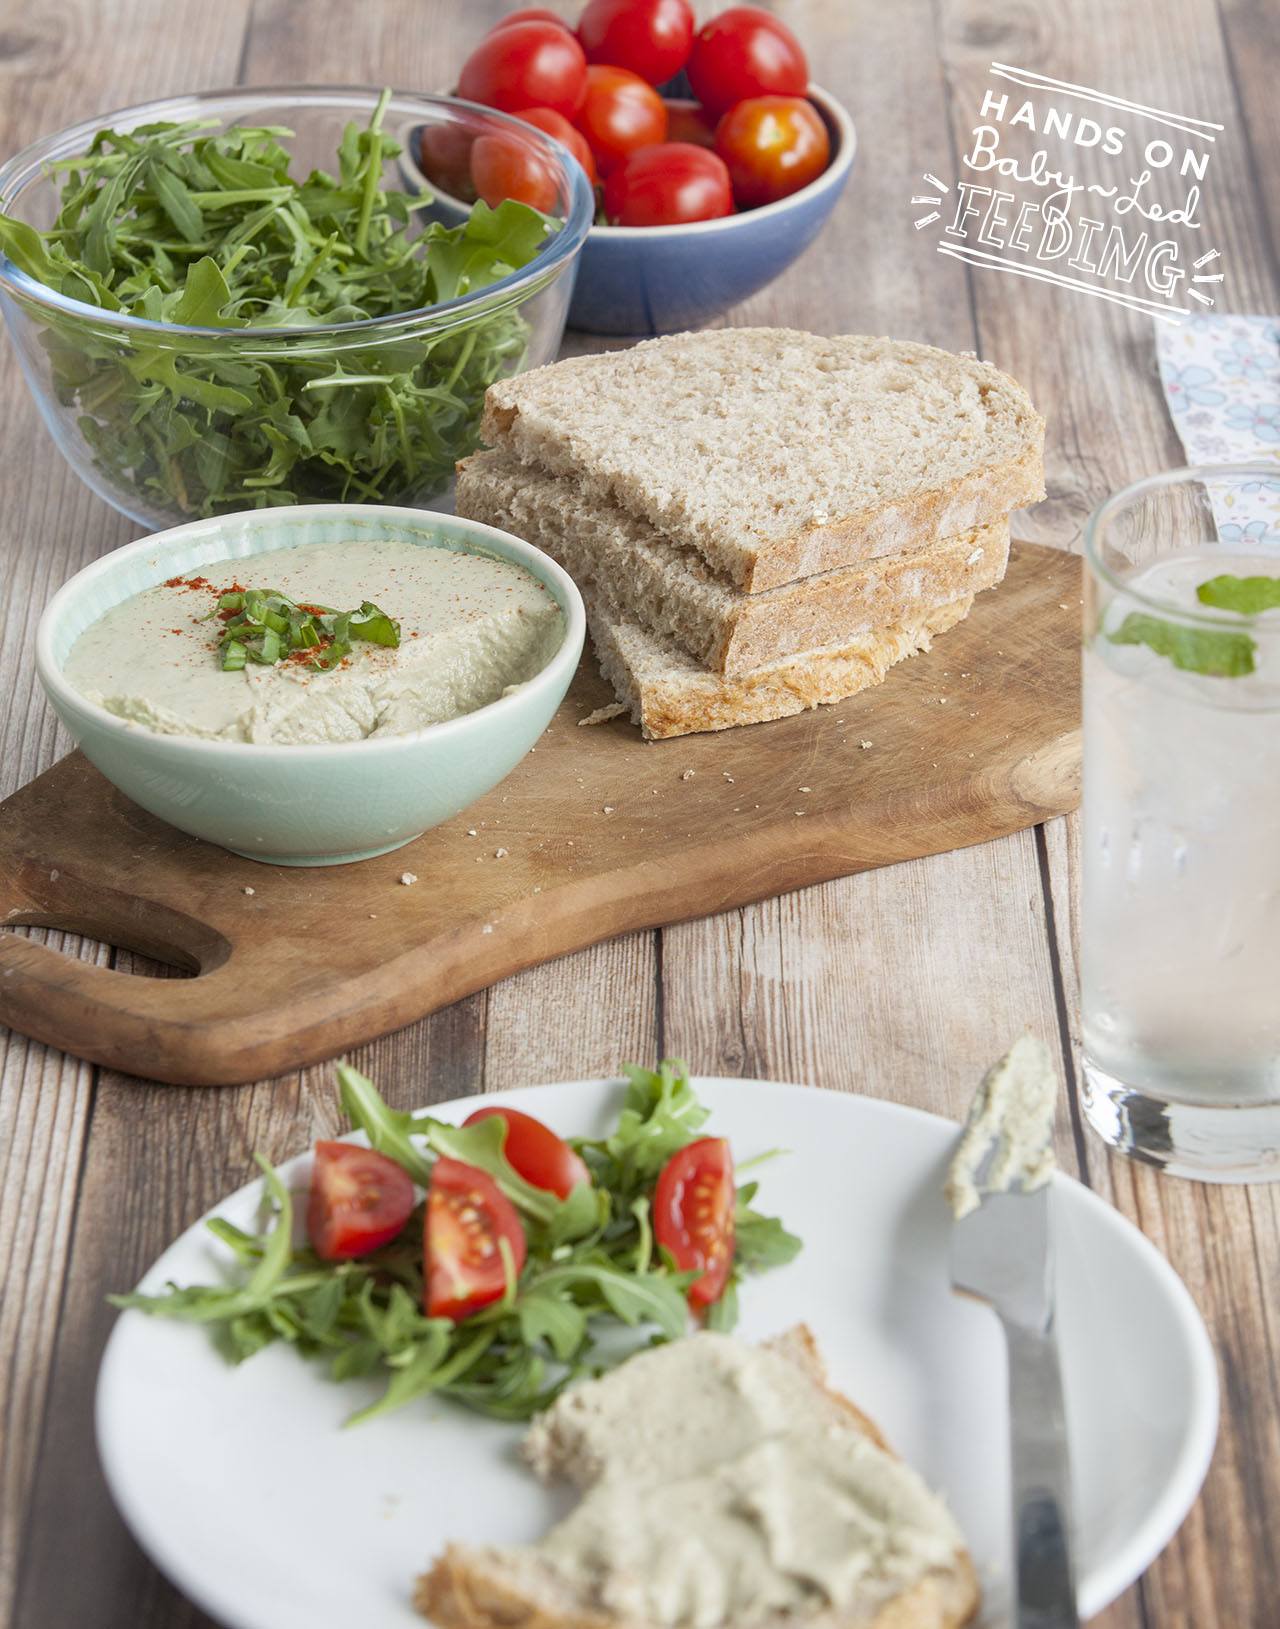 Baby led weaning mackerel pate with salad. Long recipe image. This is a perfect baby lunch recipe packed with Omega-3 rich fish and full of vitamins. Lunch ideas for baby led weaning that are easy and quick. Yummy finger foods for babies.